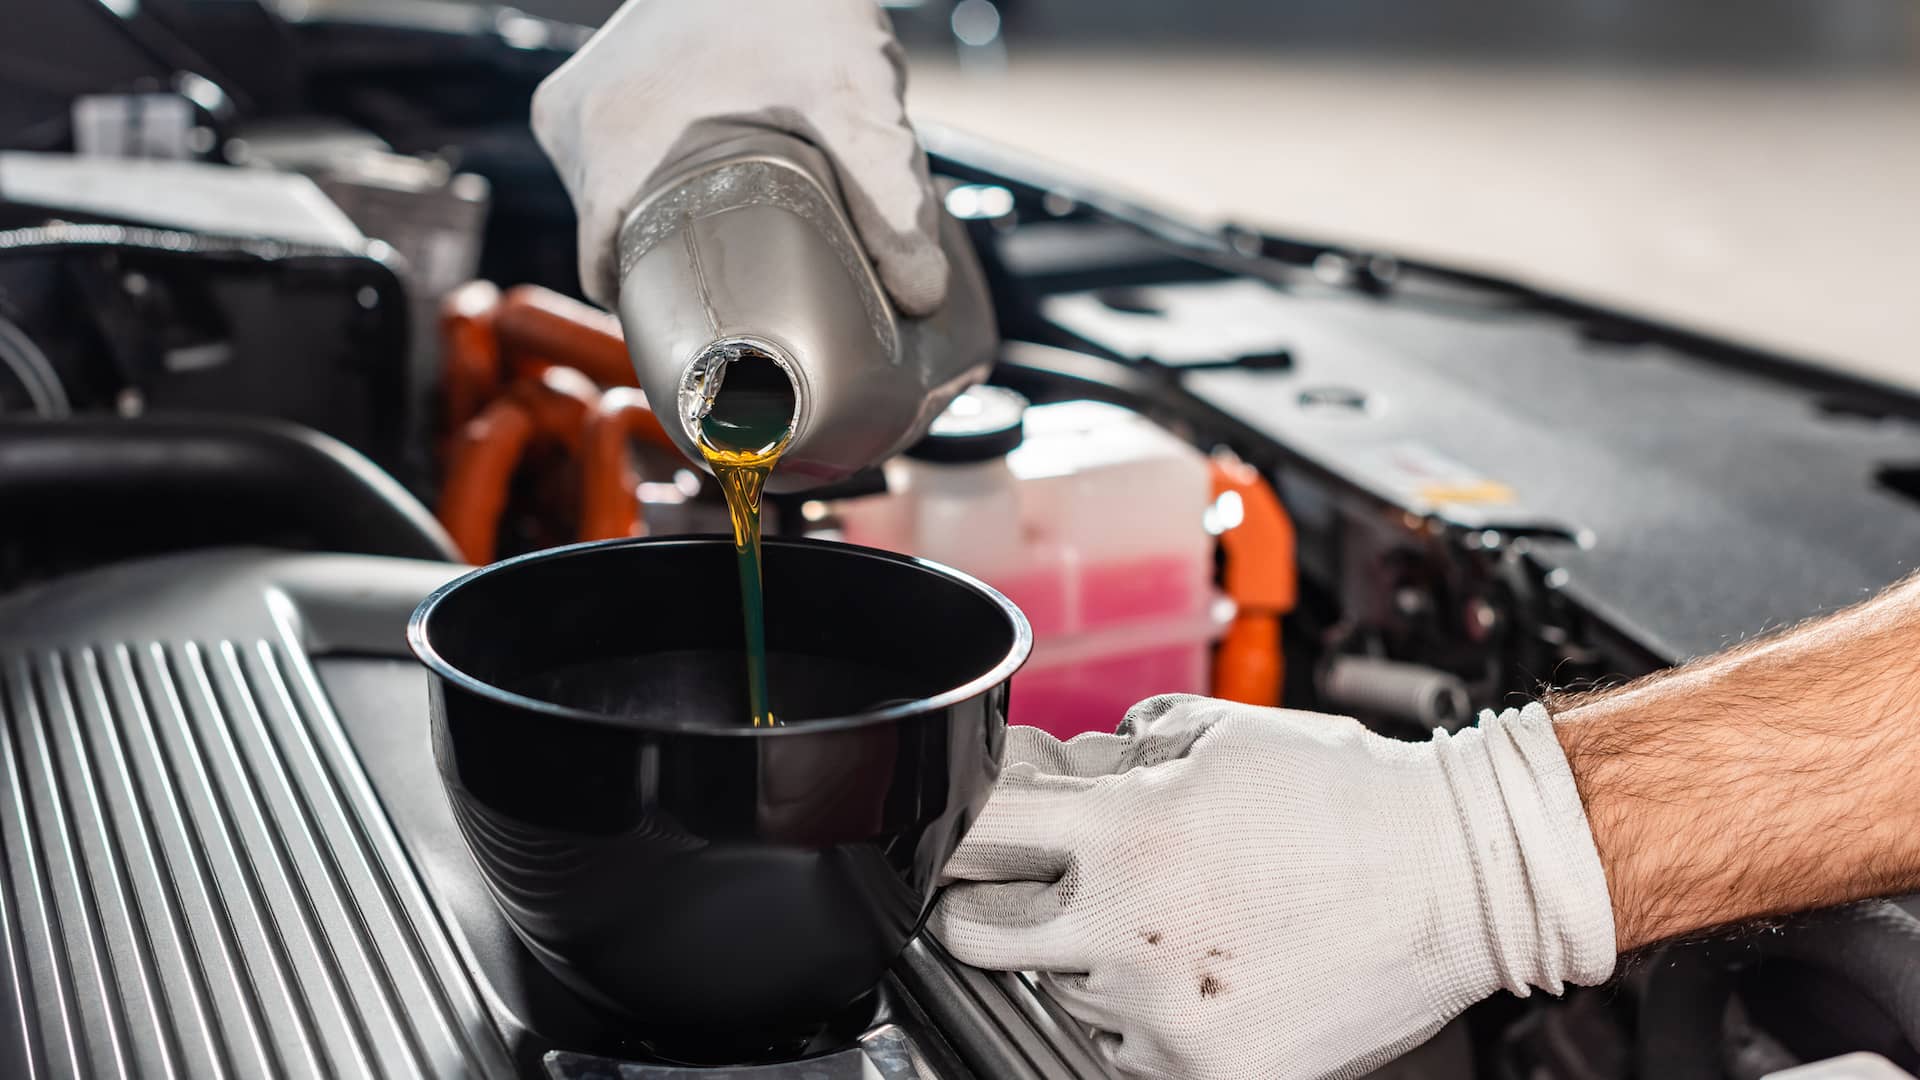 How Long Does a Car Oil Change Take?